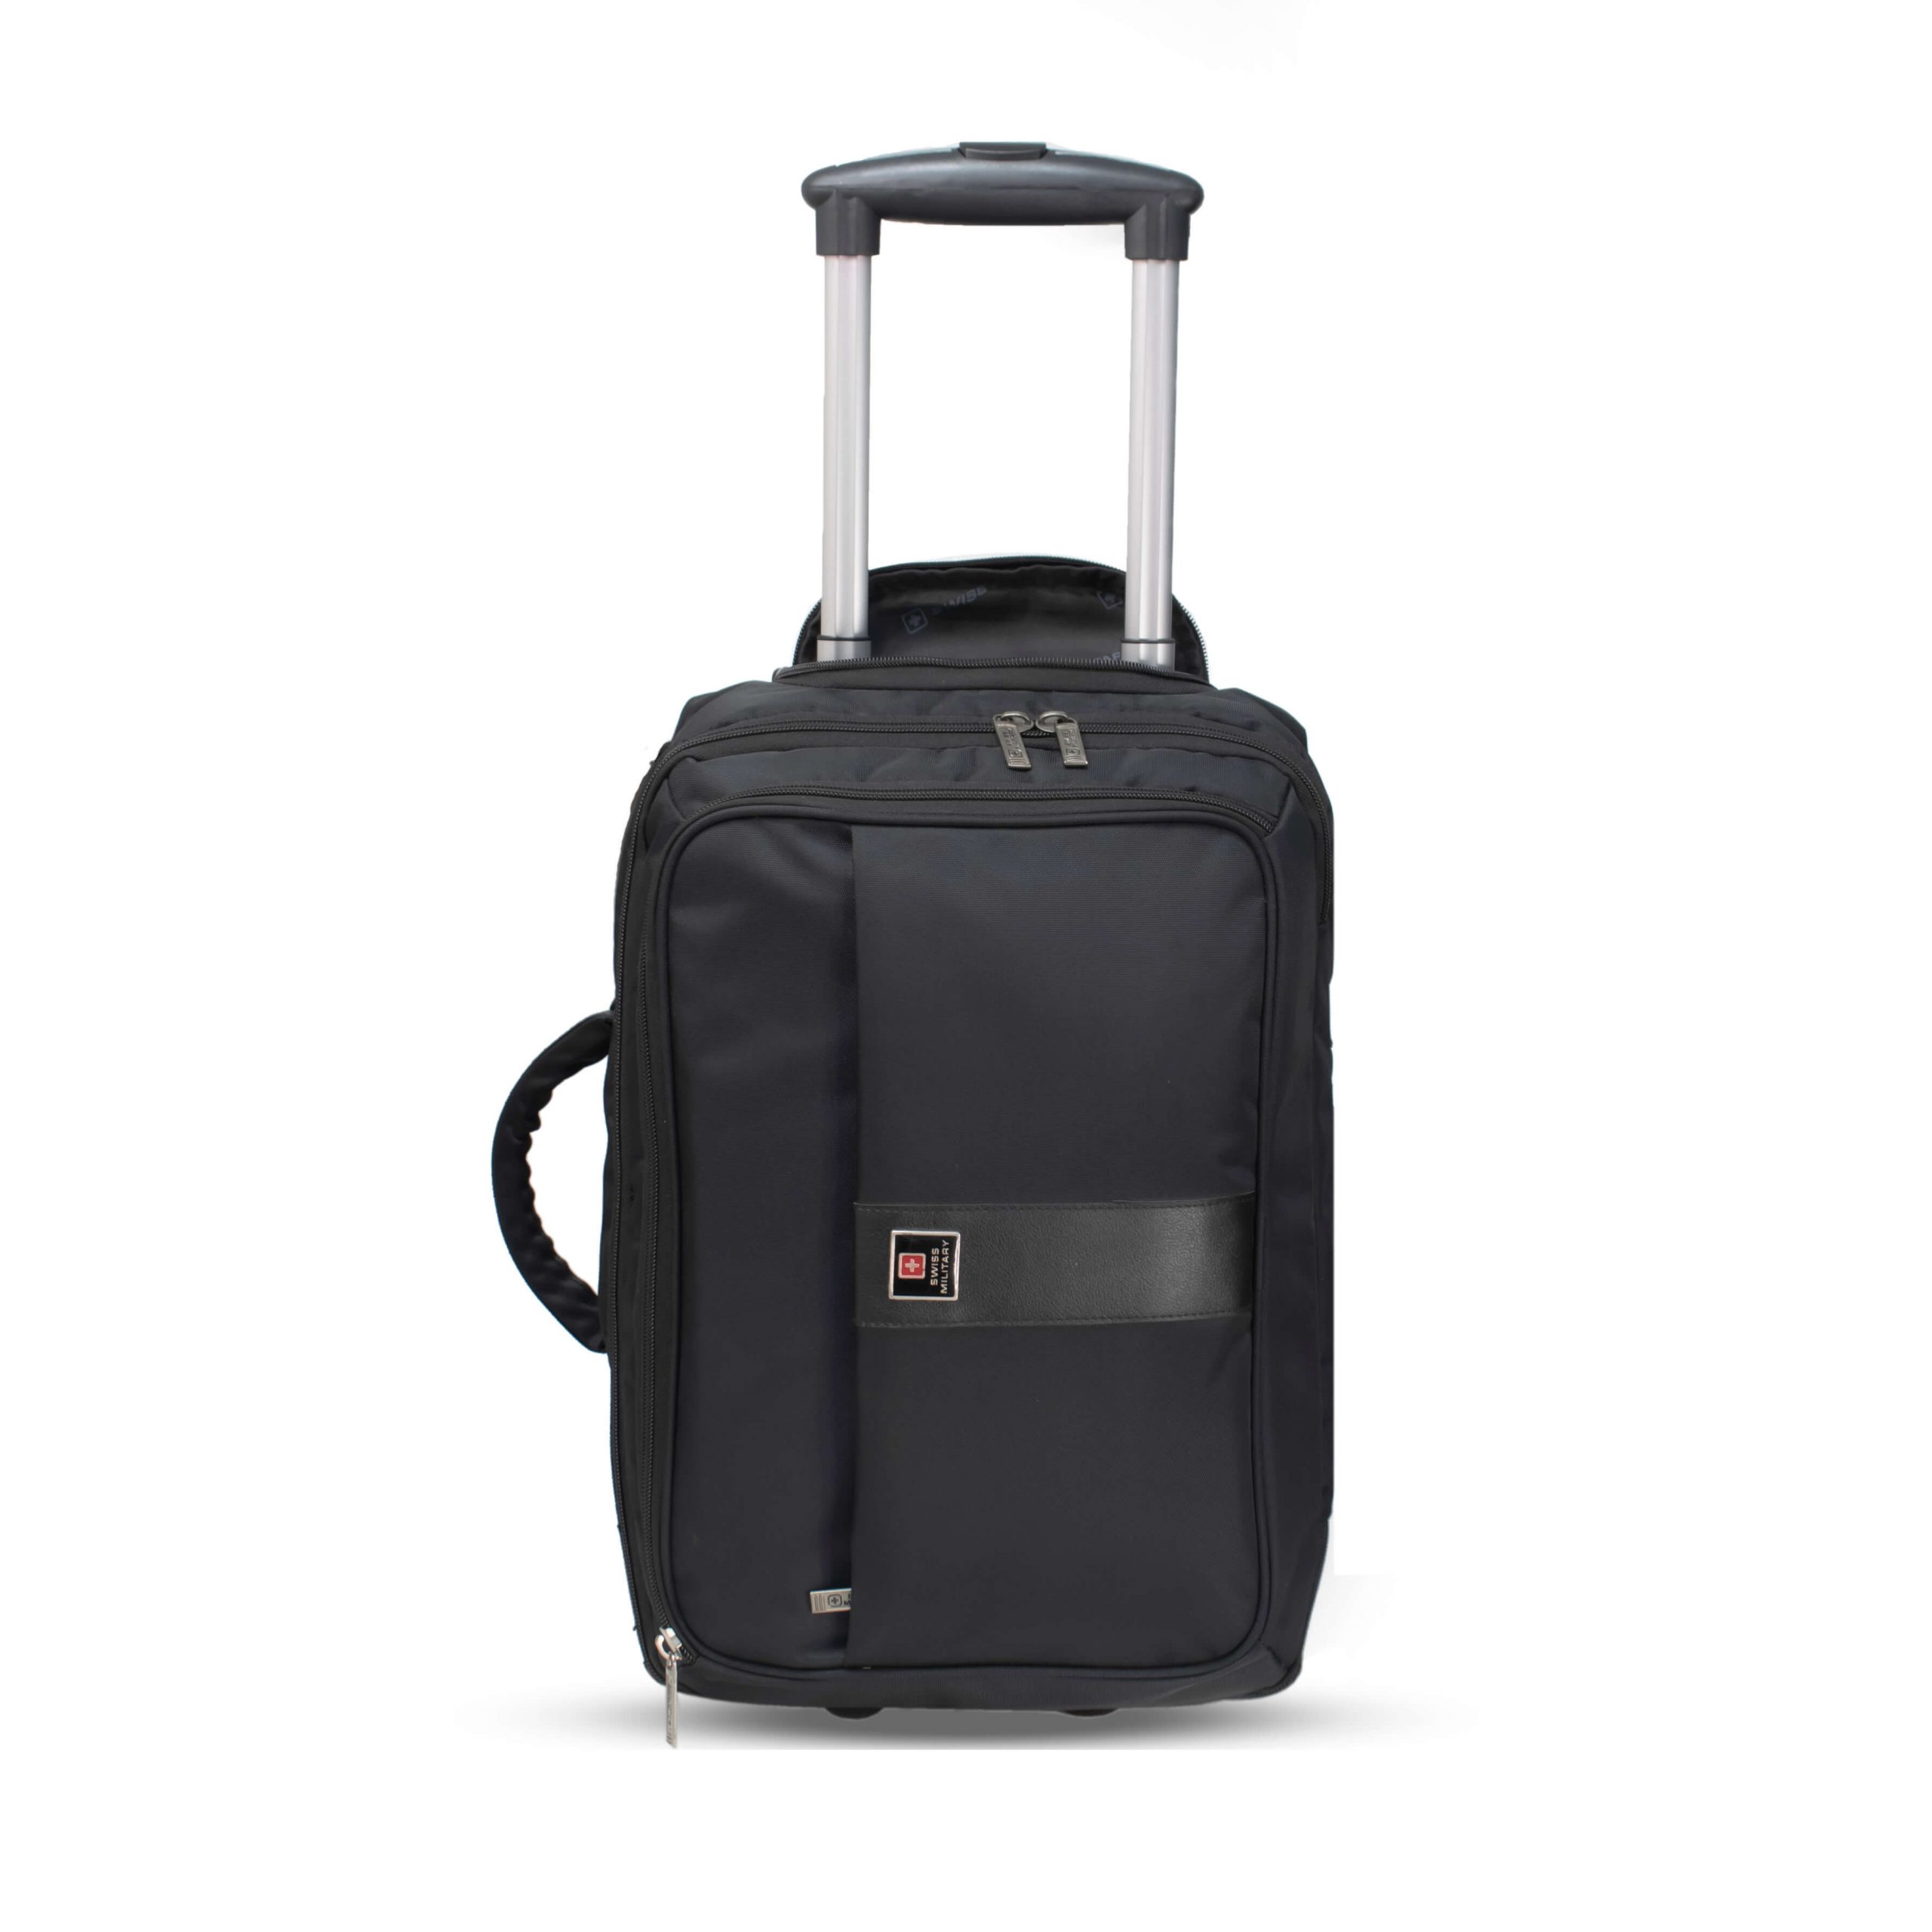 Share more than 77 travel laptop bag with trolley super hot ...